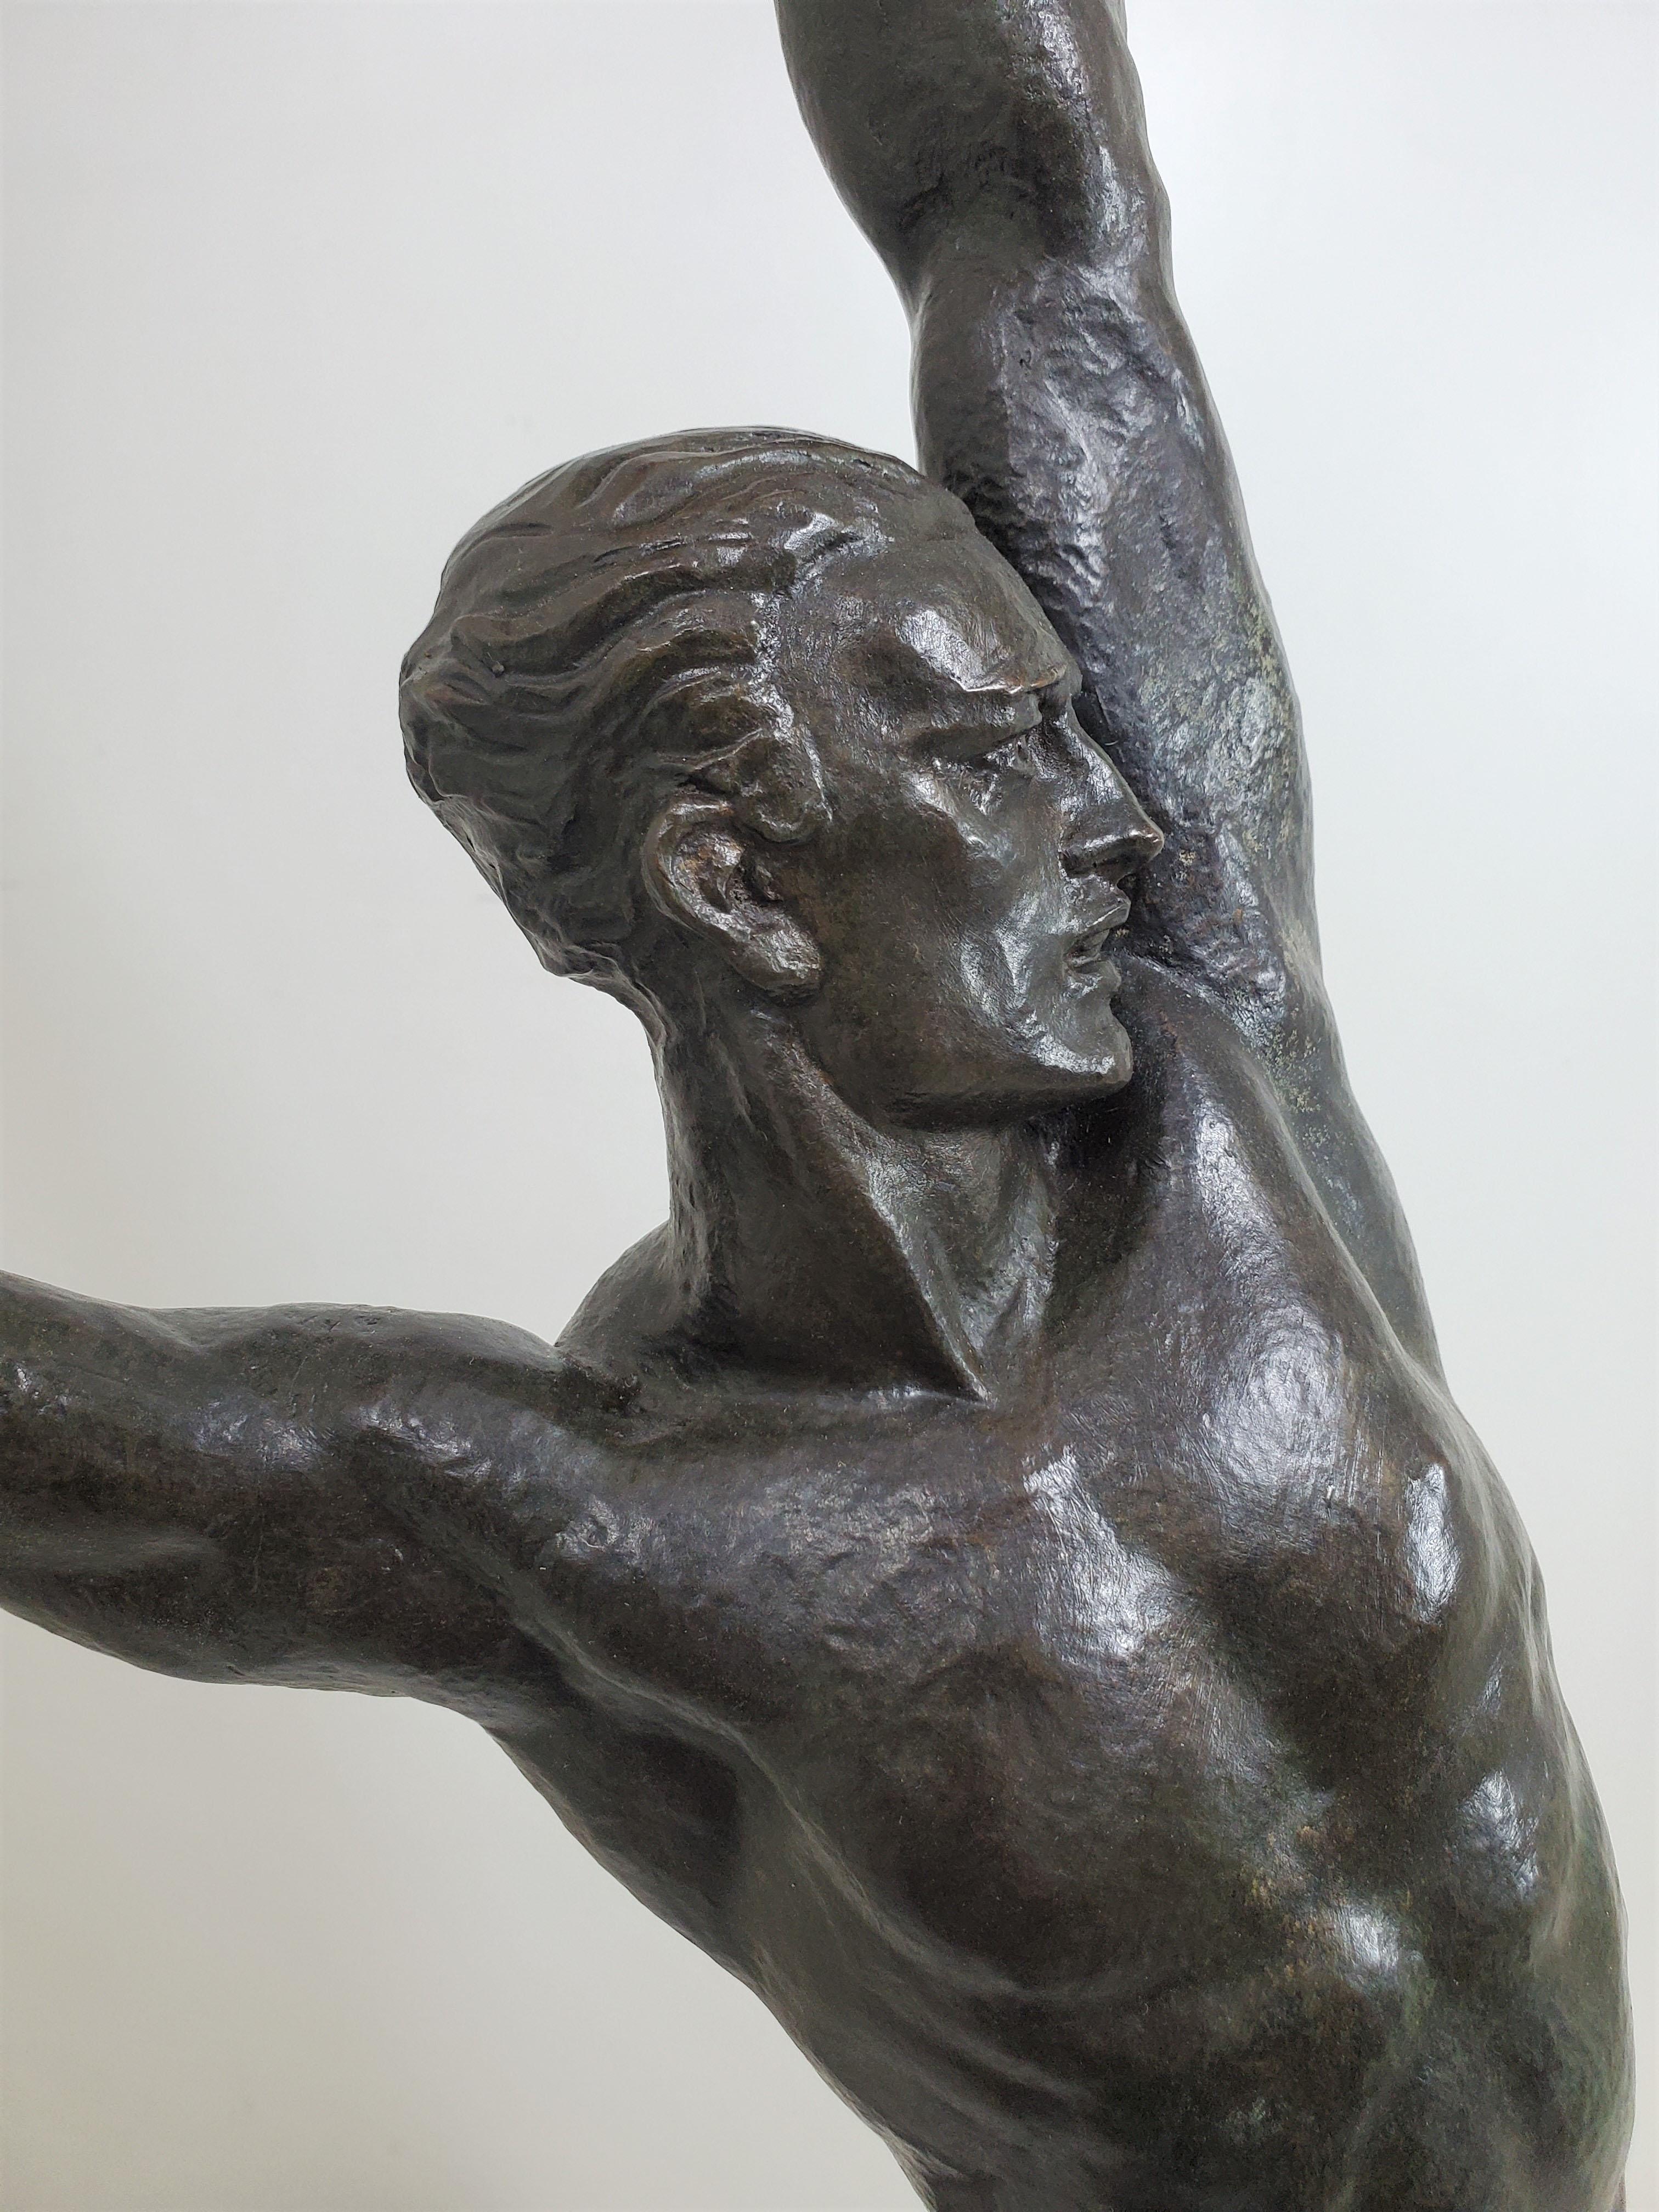 Large Original French Art Deco Bronze of a Semi-Nude Male Athlete by Le Faguays For Sale 9